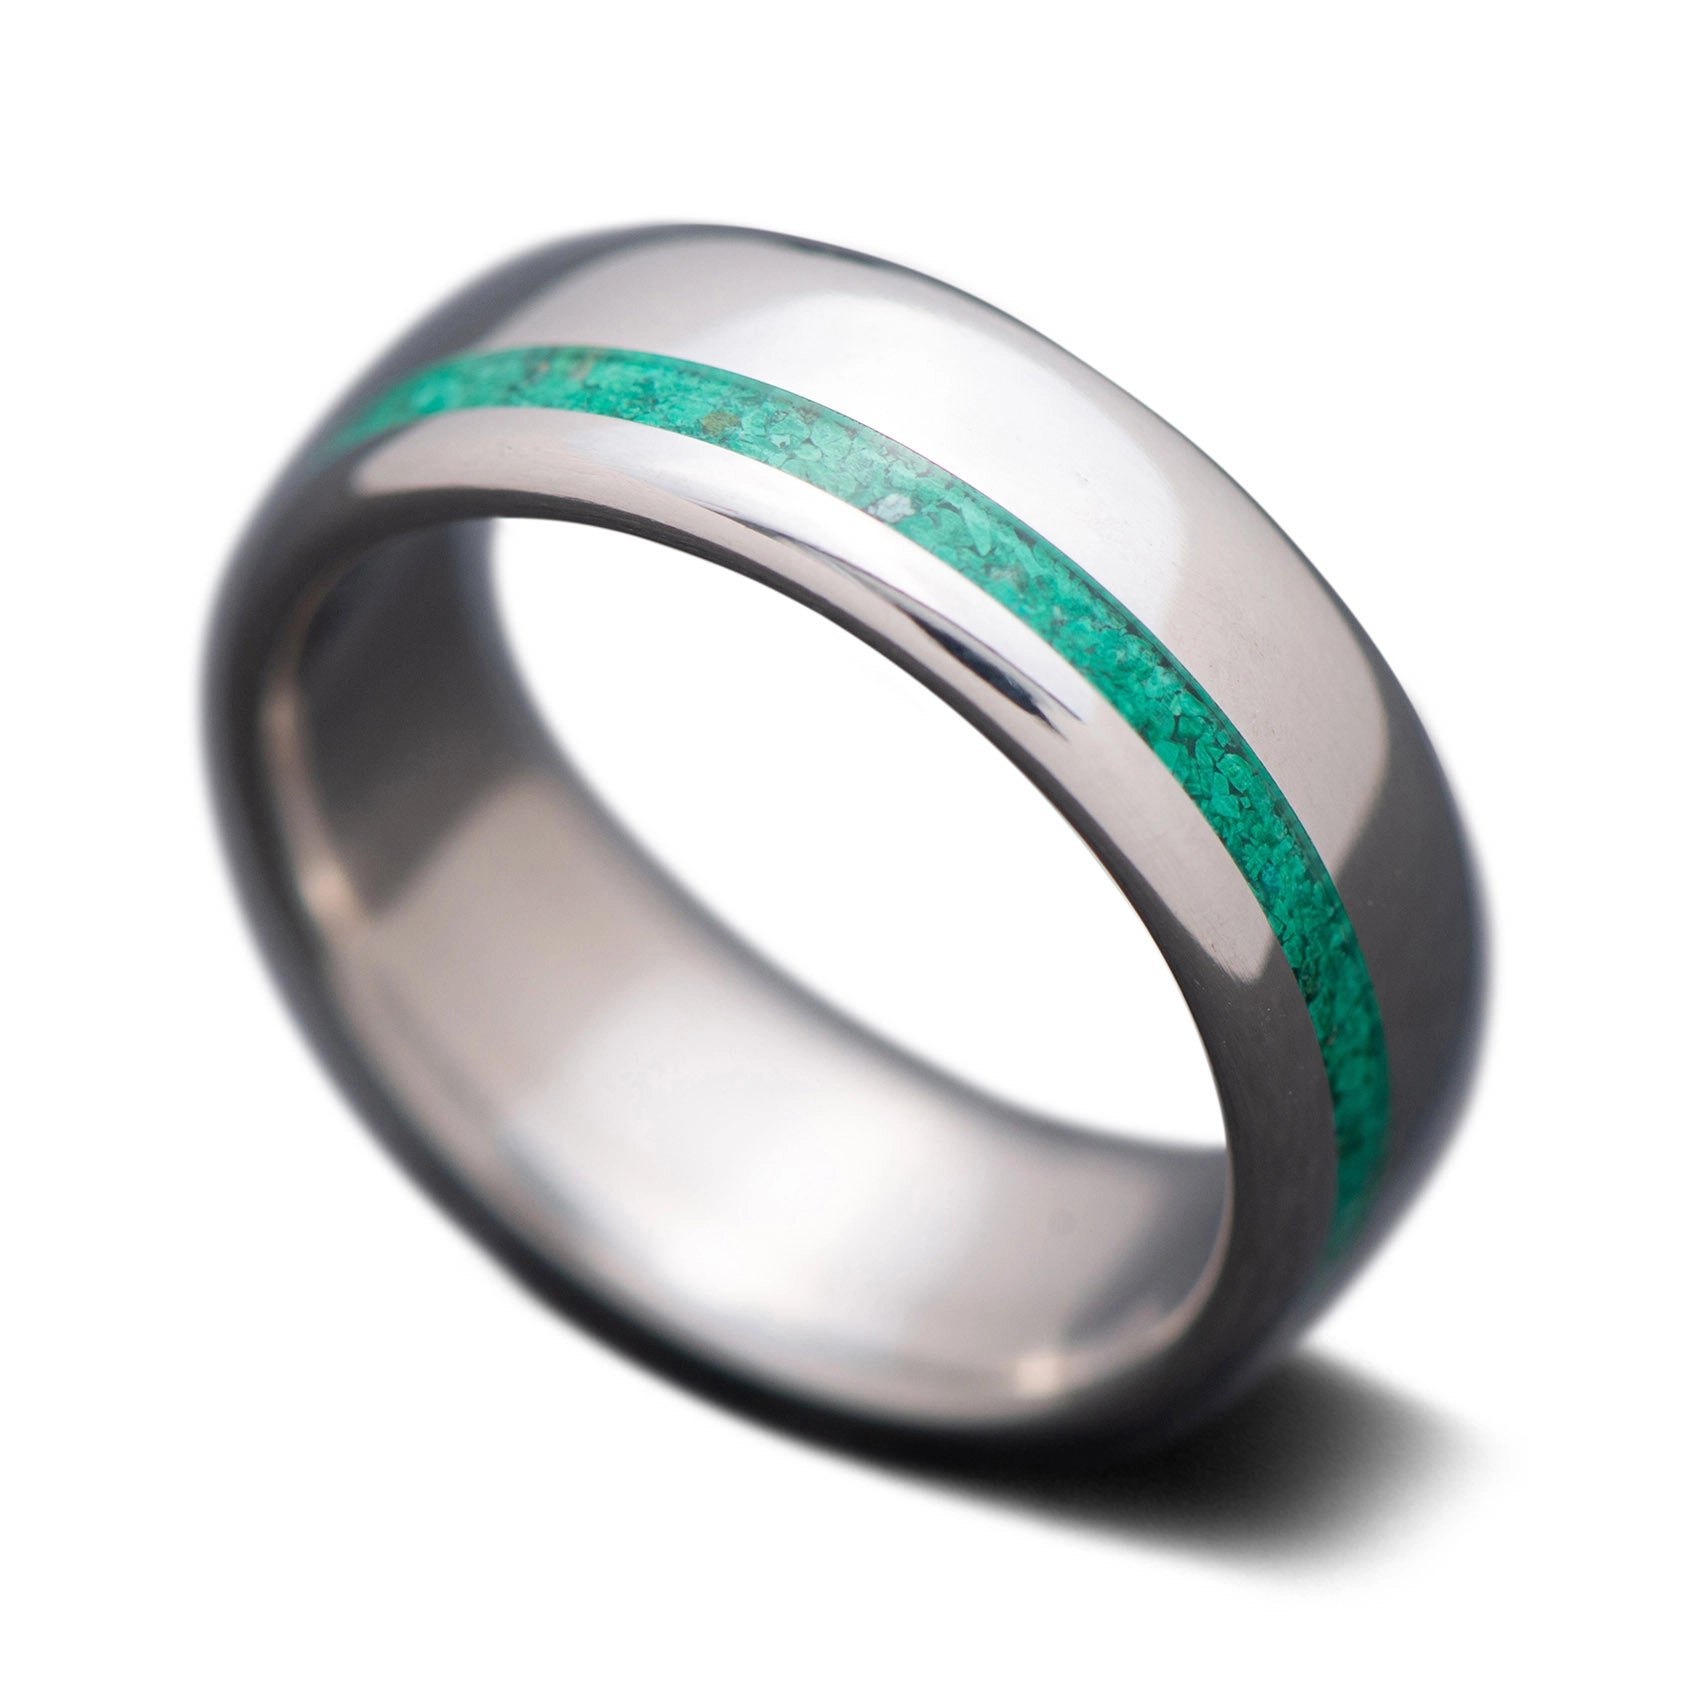 Titanium Core Ring with Malachite inlay, 7mm -THE SHIFT